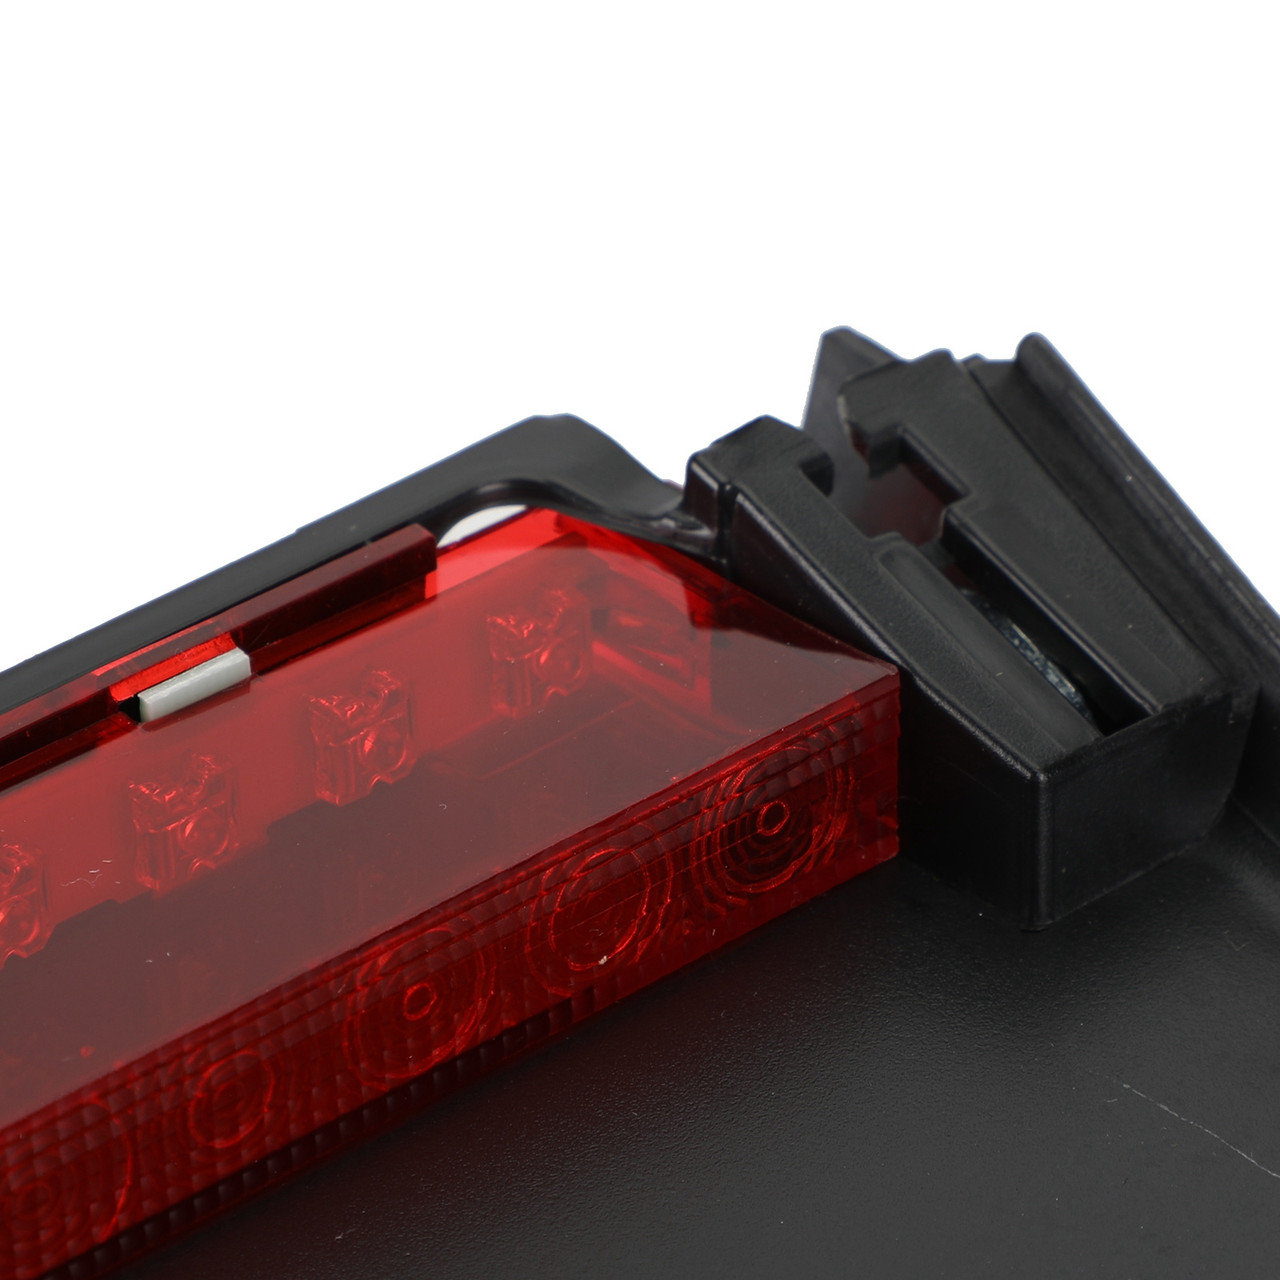 Third 3rd Brake Stop Light 8T0945097B For Audi A5 S5 Coupe Sportback 2009-2016